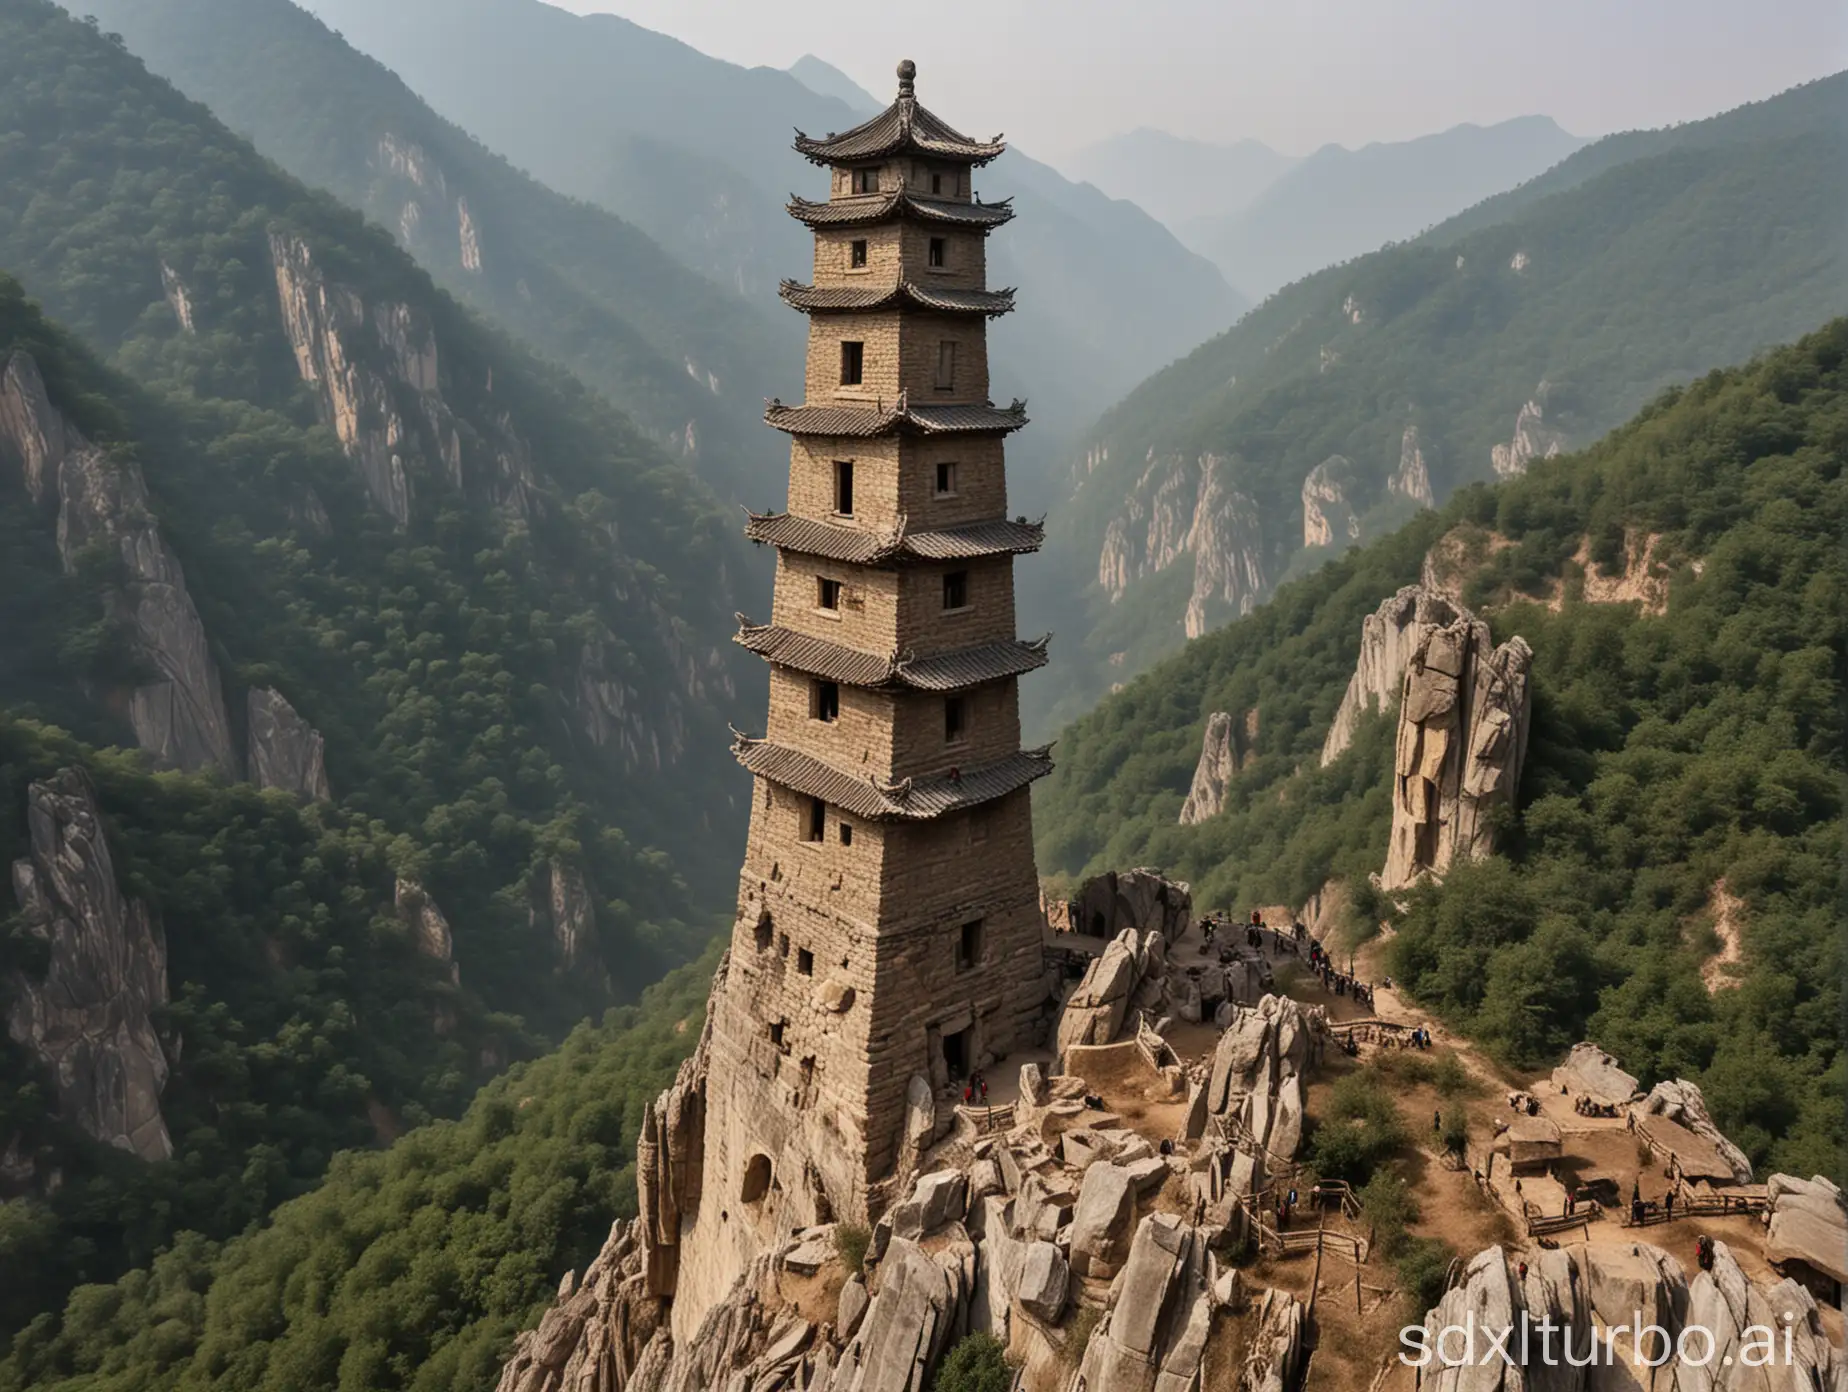 in the mountains, a Chinese ancient tower severely tilts 30 degrees